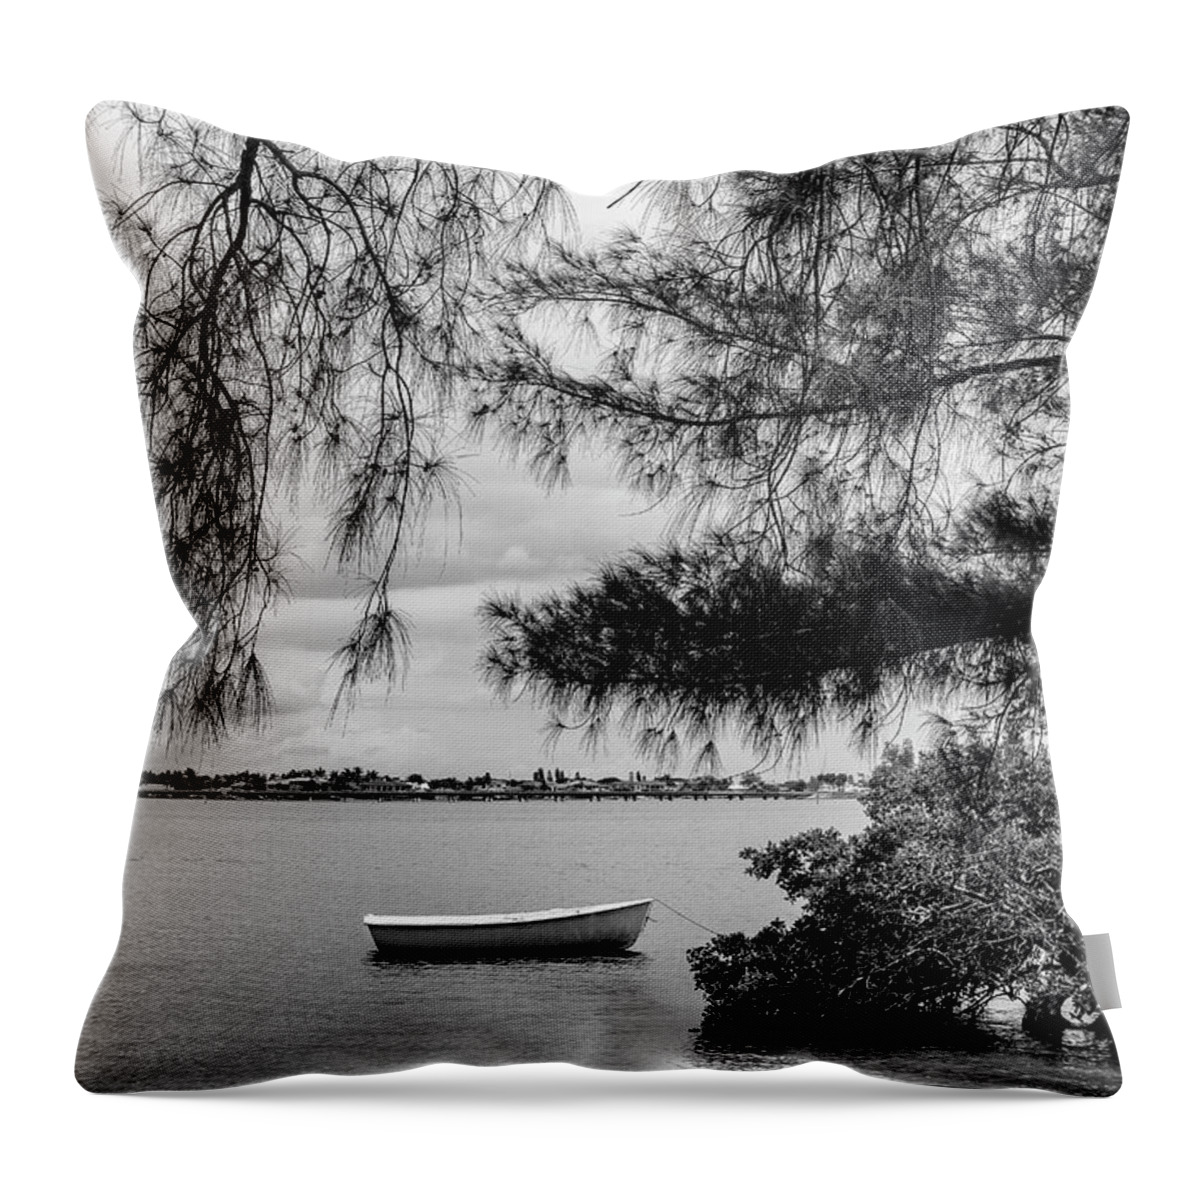 Photo For Sale Throw Pillow featuring the photograph Sarasota Bay View by Robert Wilder Jr